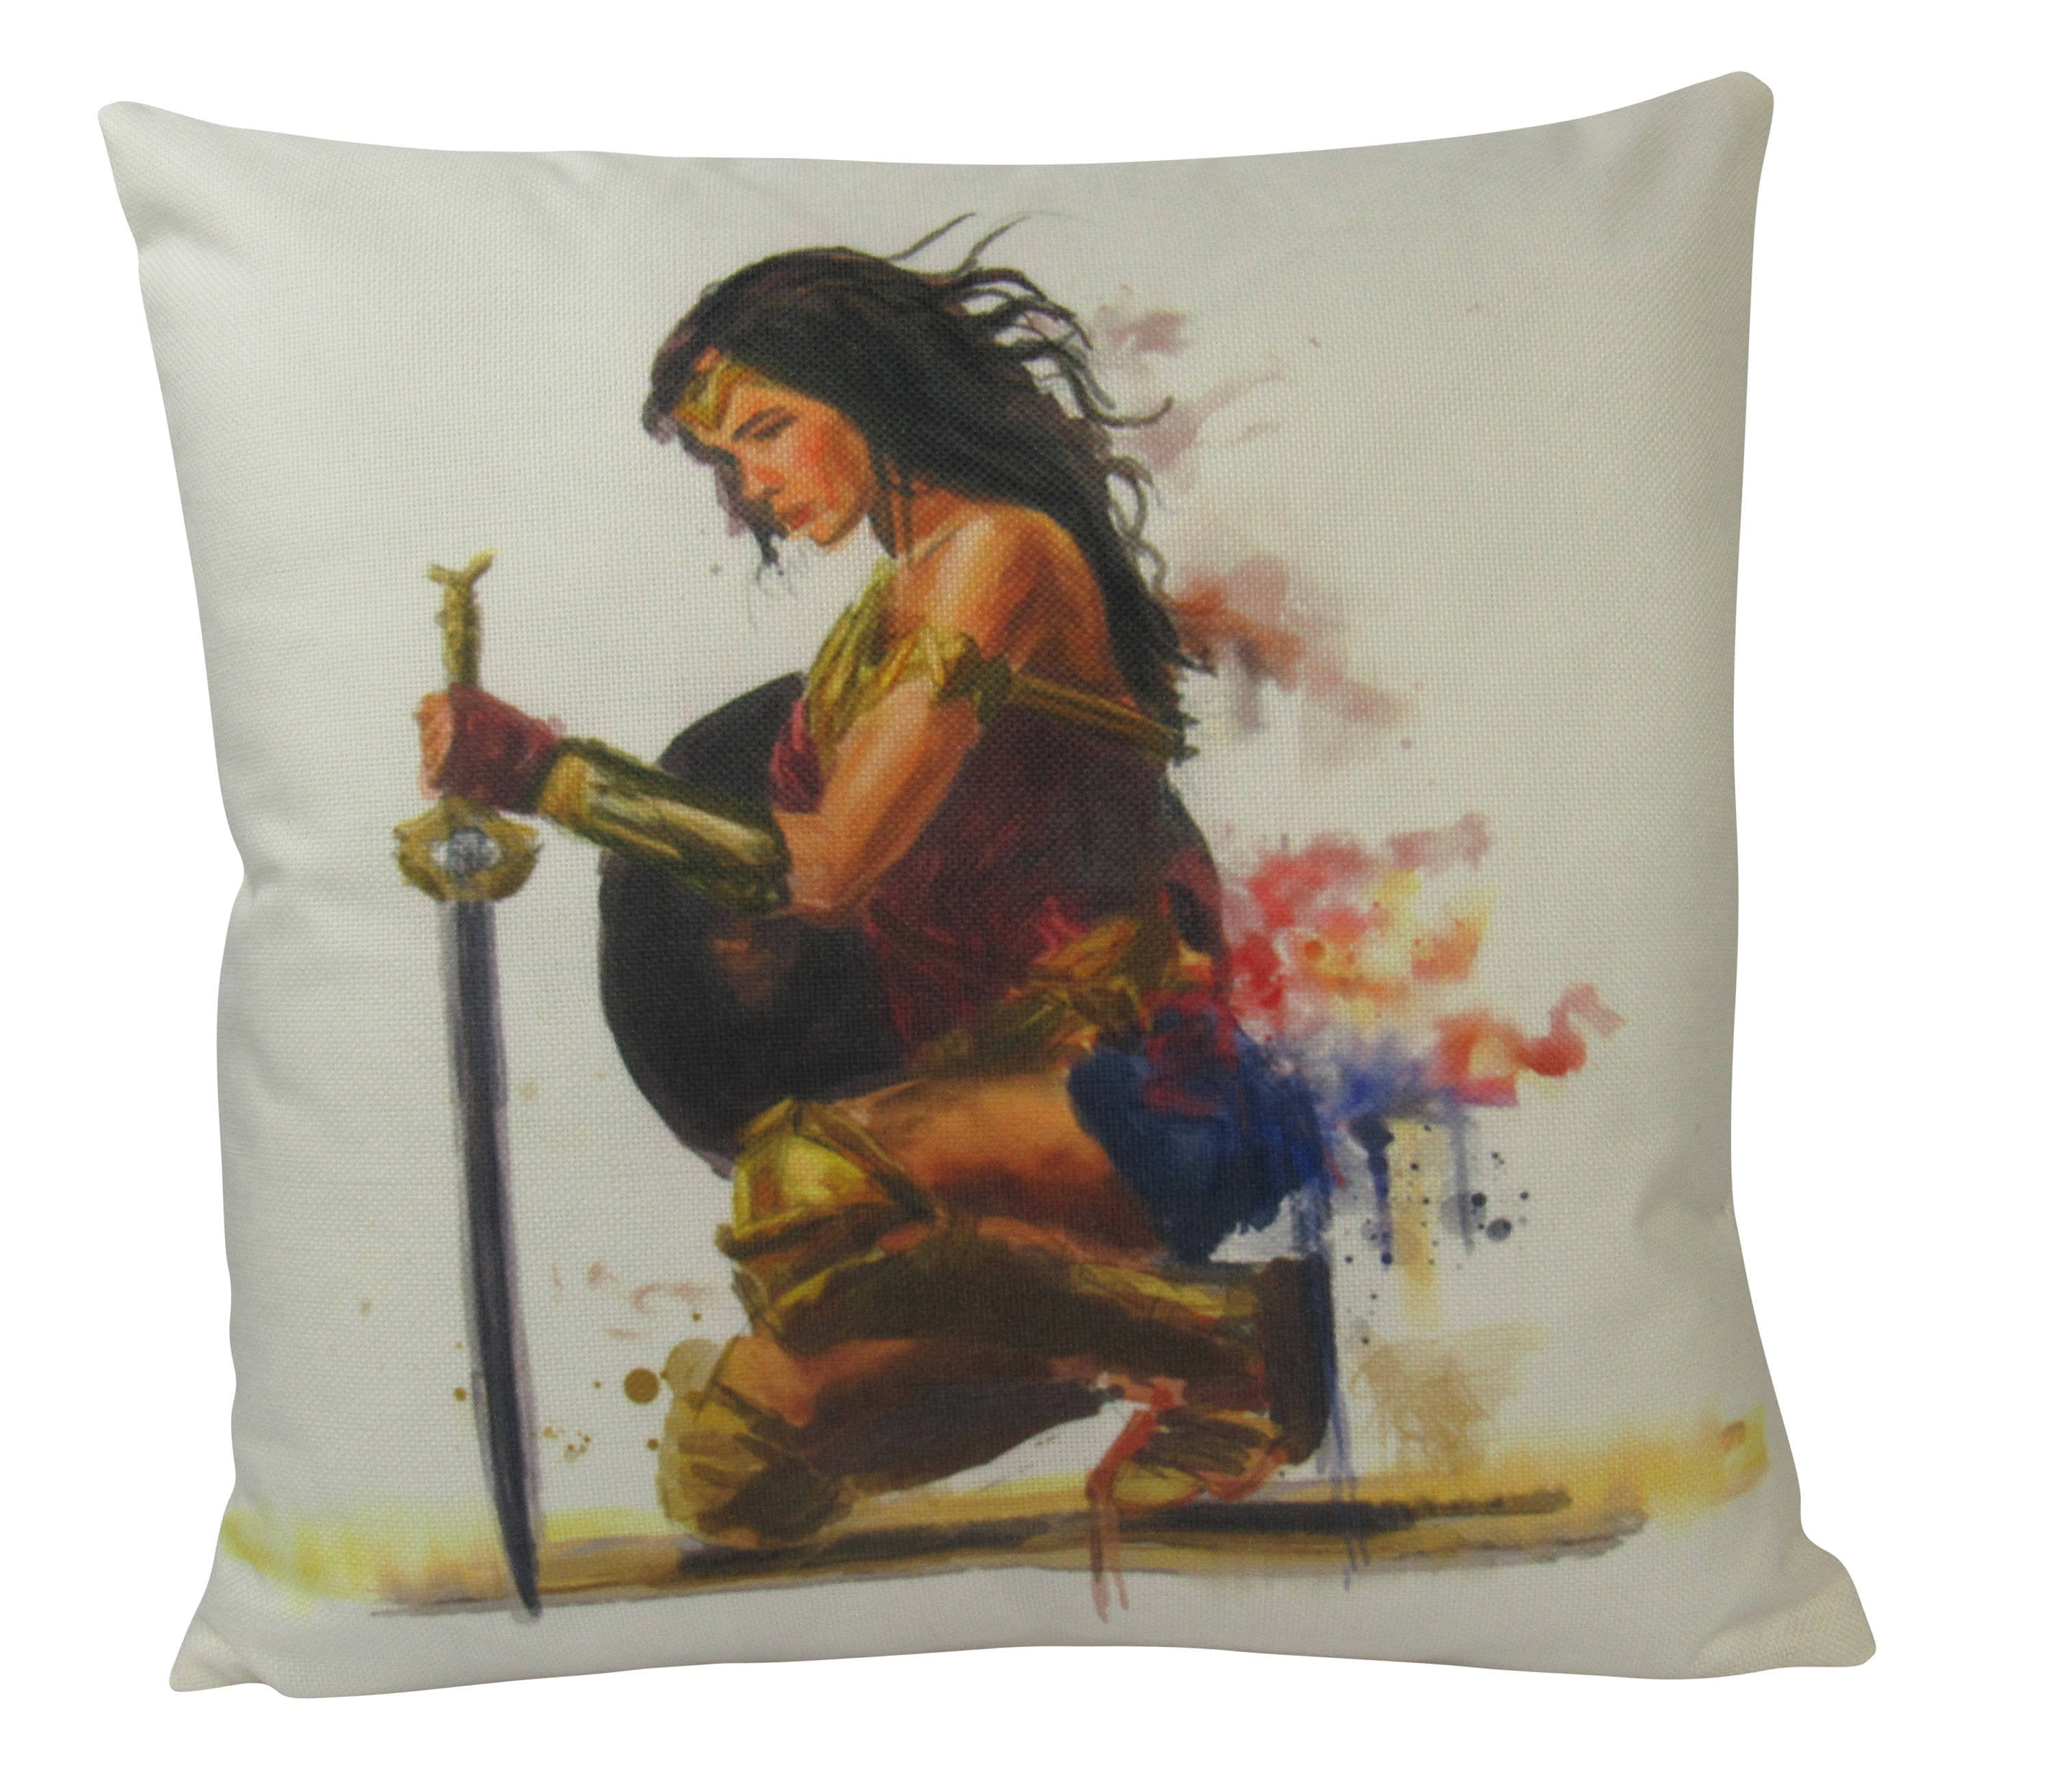 Two Sides shengpeng Wonder Woman Home Decor Throw Pillow Cases 18x18 